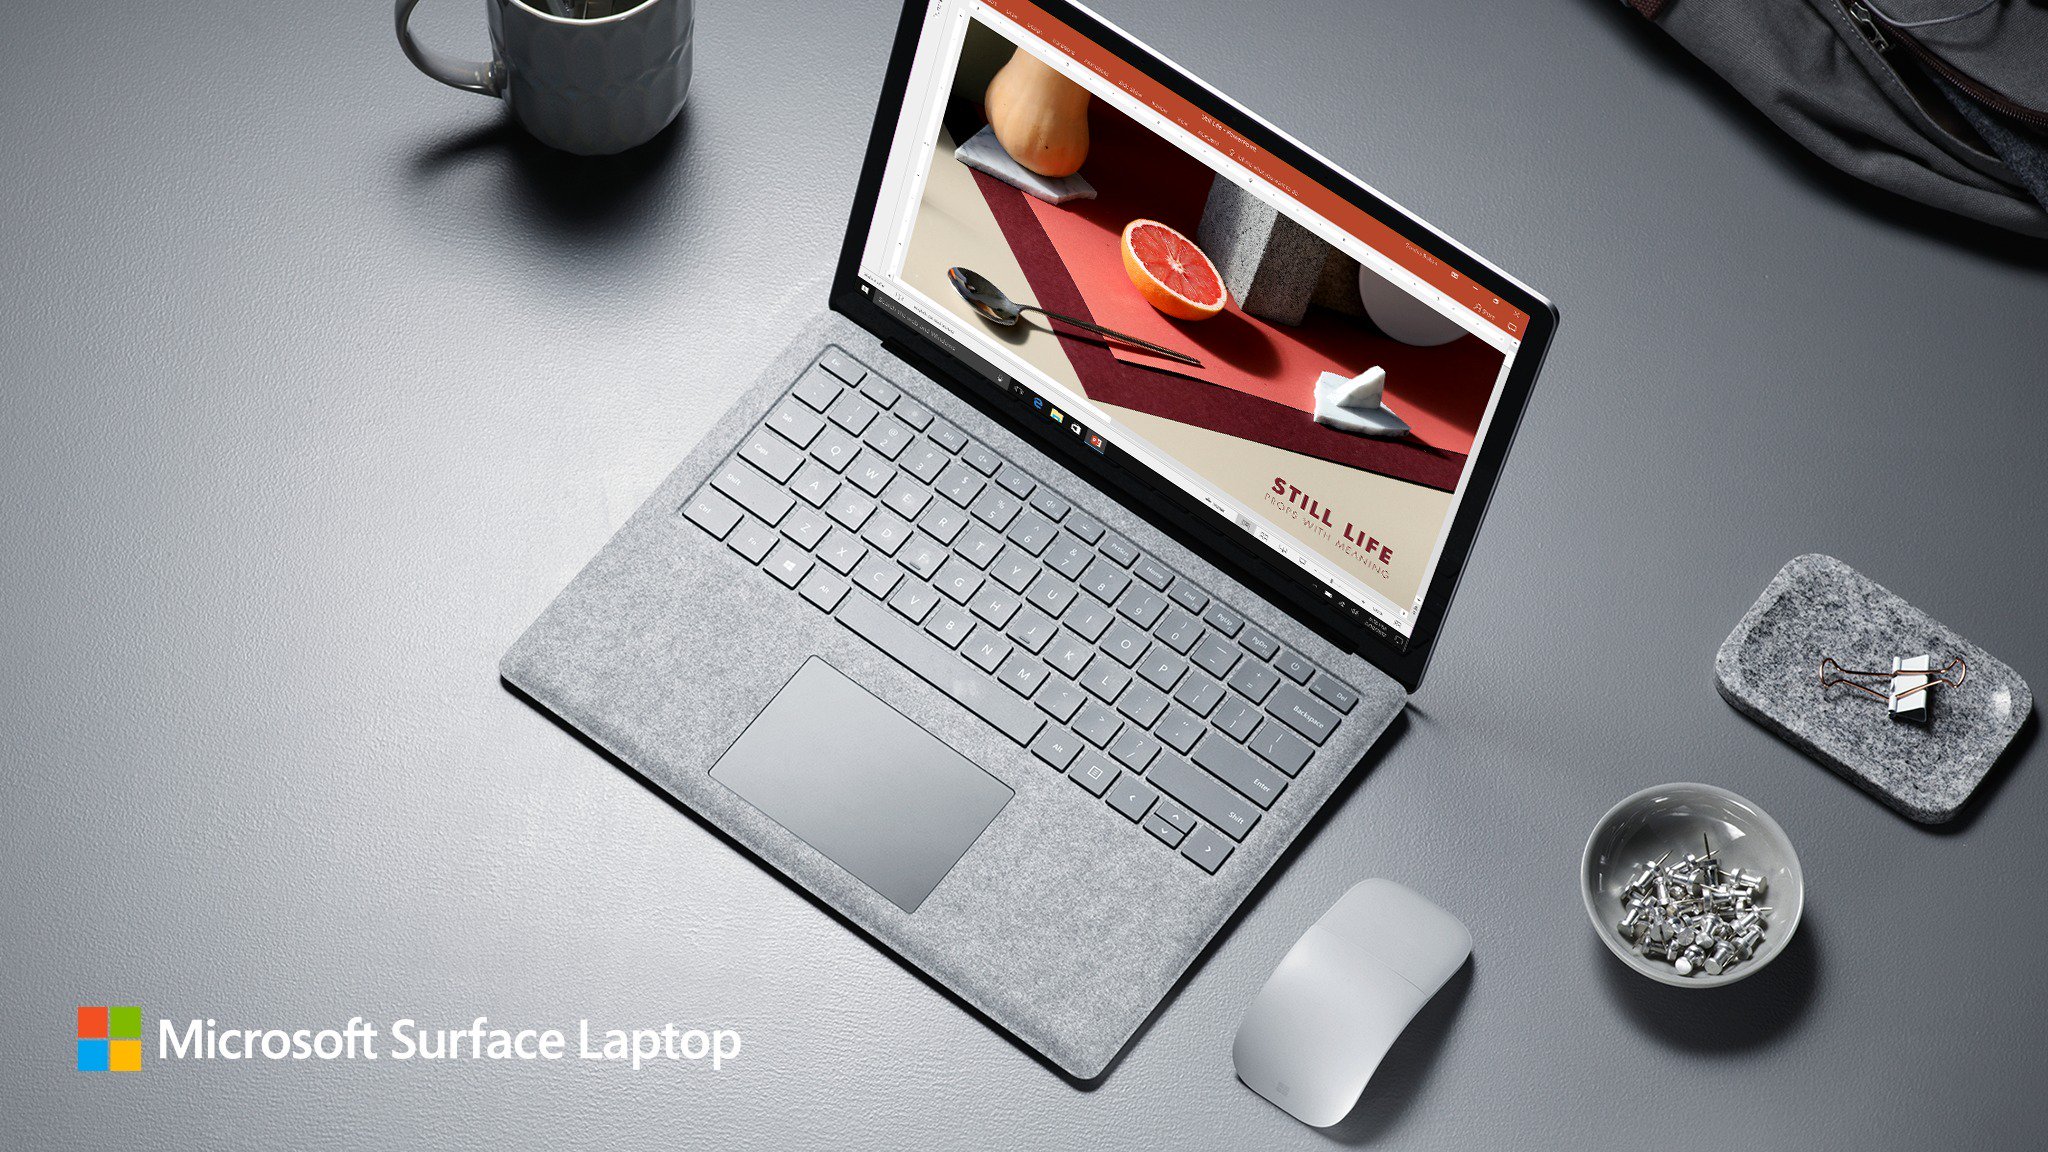 Microsoft is working on a 12.5-inch “ affordable” Surface Laptop